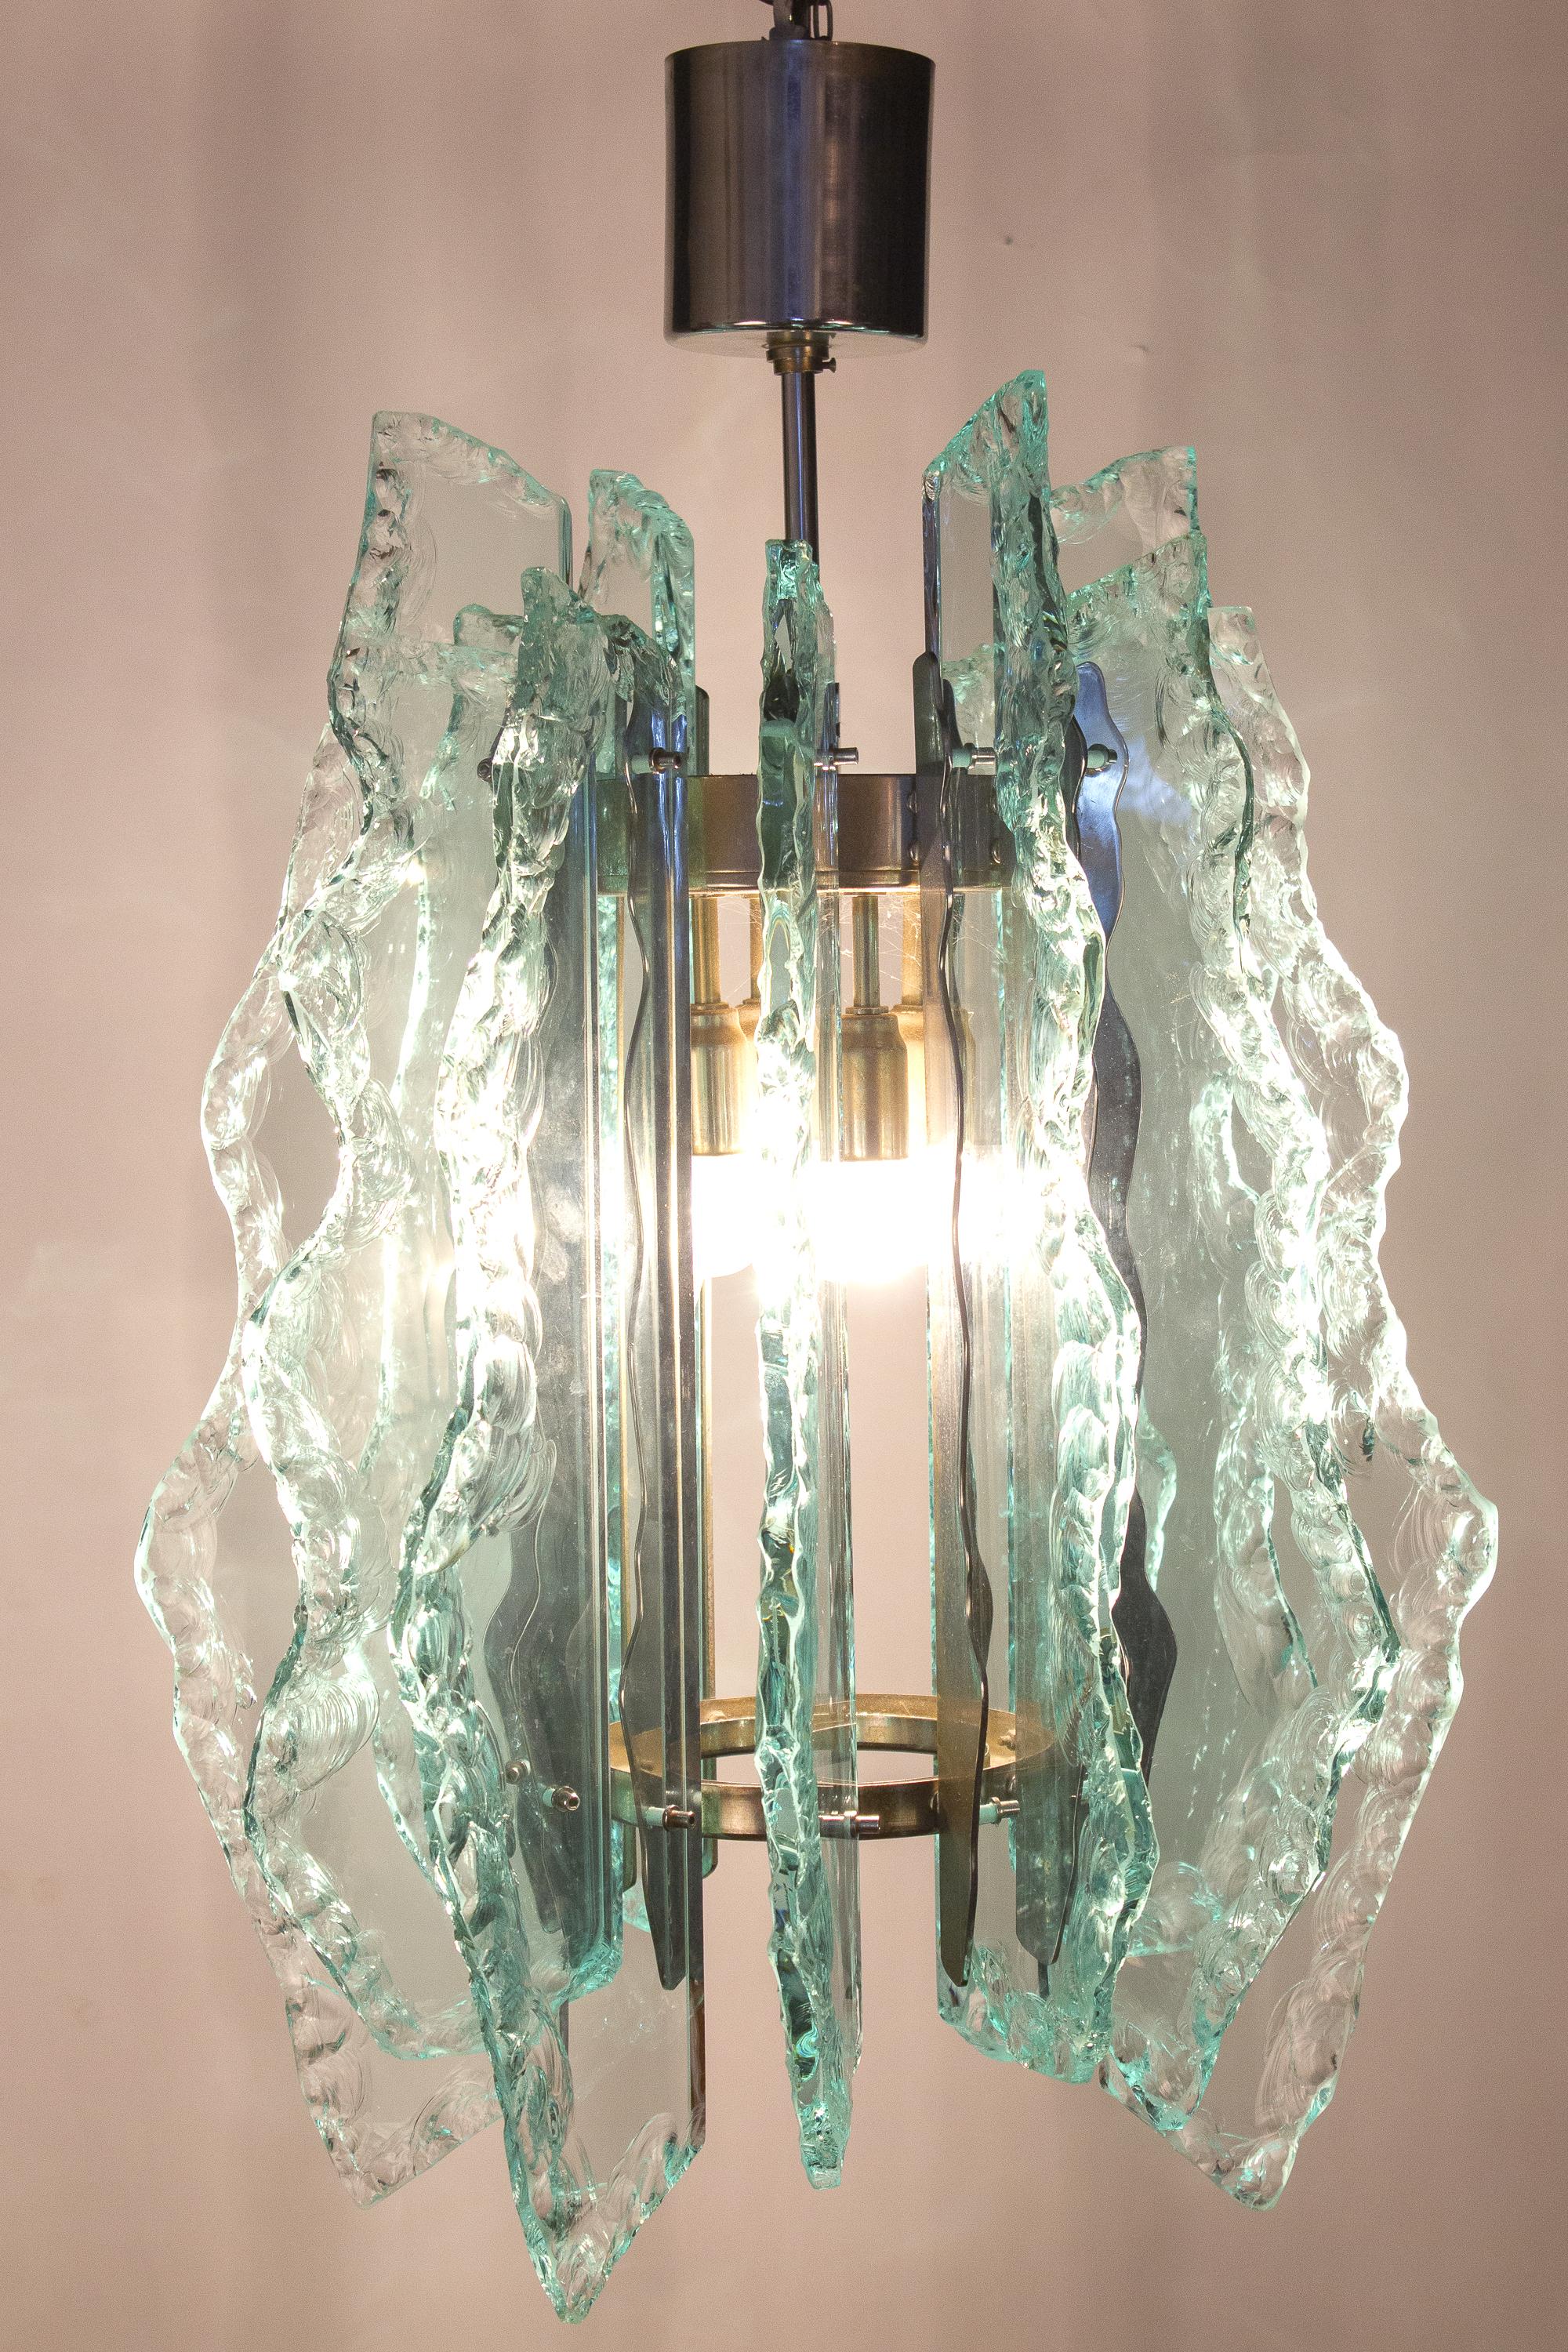 Amazing  Mid - Century  Fontana Arte  chandelier. Chrome frame with precious green colored Hammered cut-glass.
 Available an other chandelier with gold frame. 
Lighting: takes six small Edison E14 base screw bulbs.
Wattage: we recommend up to 40w